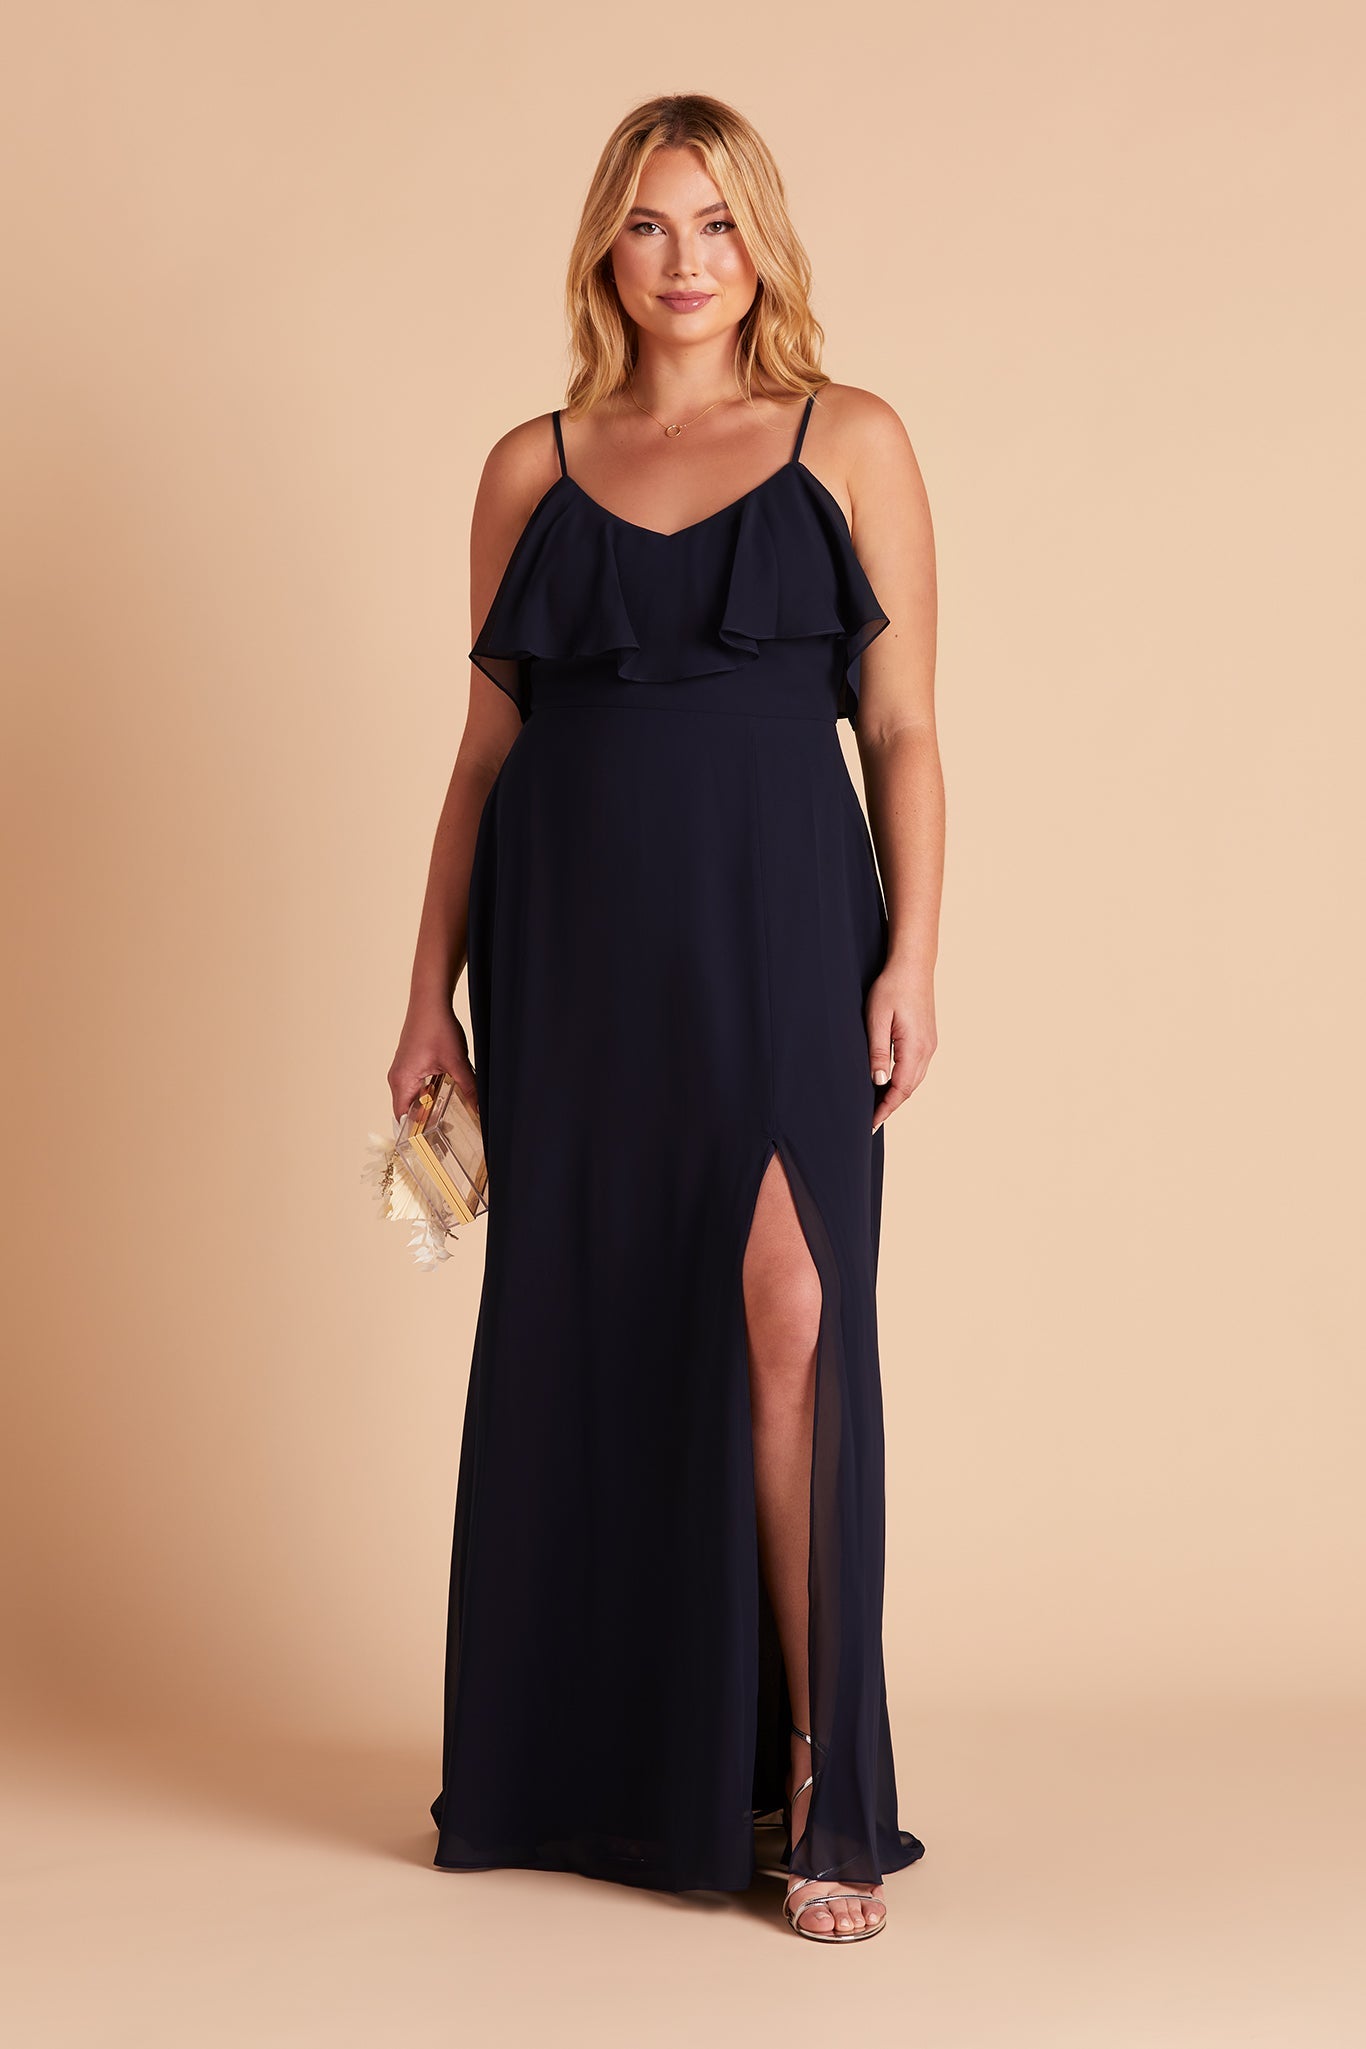 Jane convertible plus size bridesmaid dress with slit in navy blue chiffon by Birdy Grey, front view